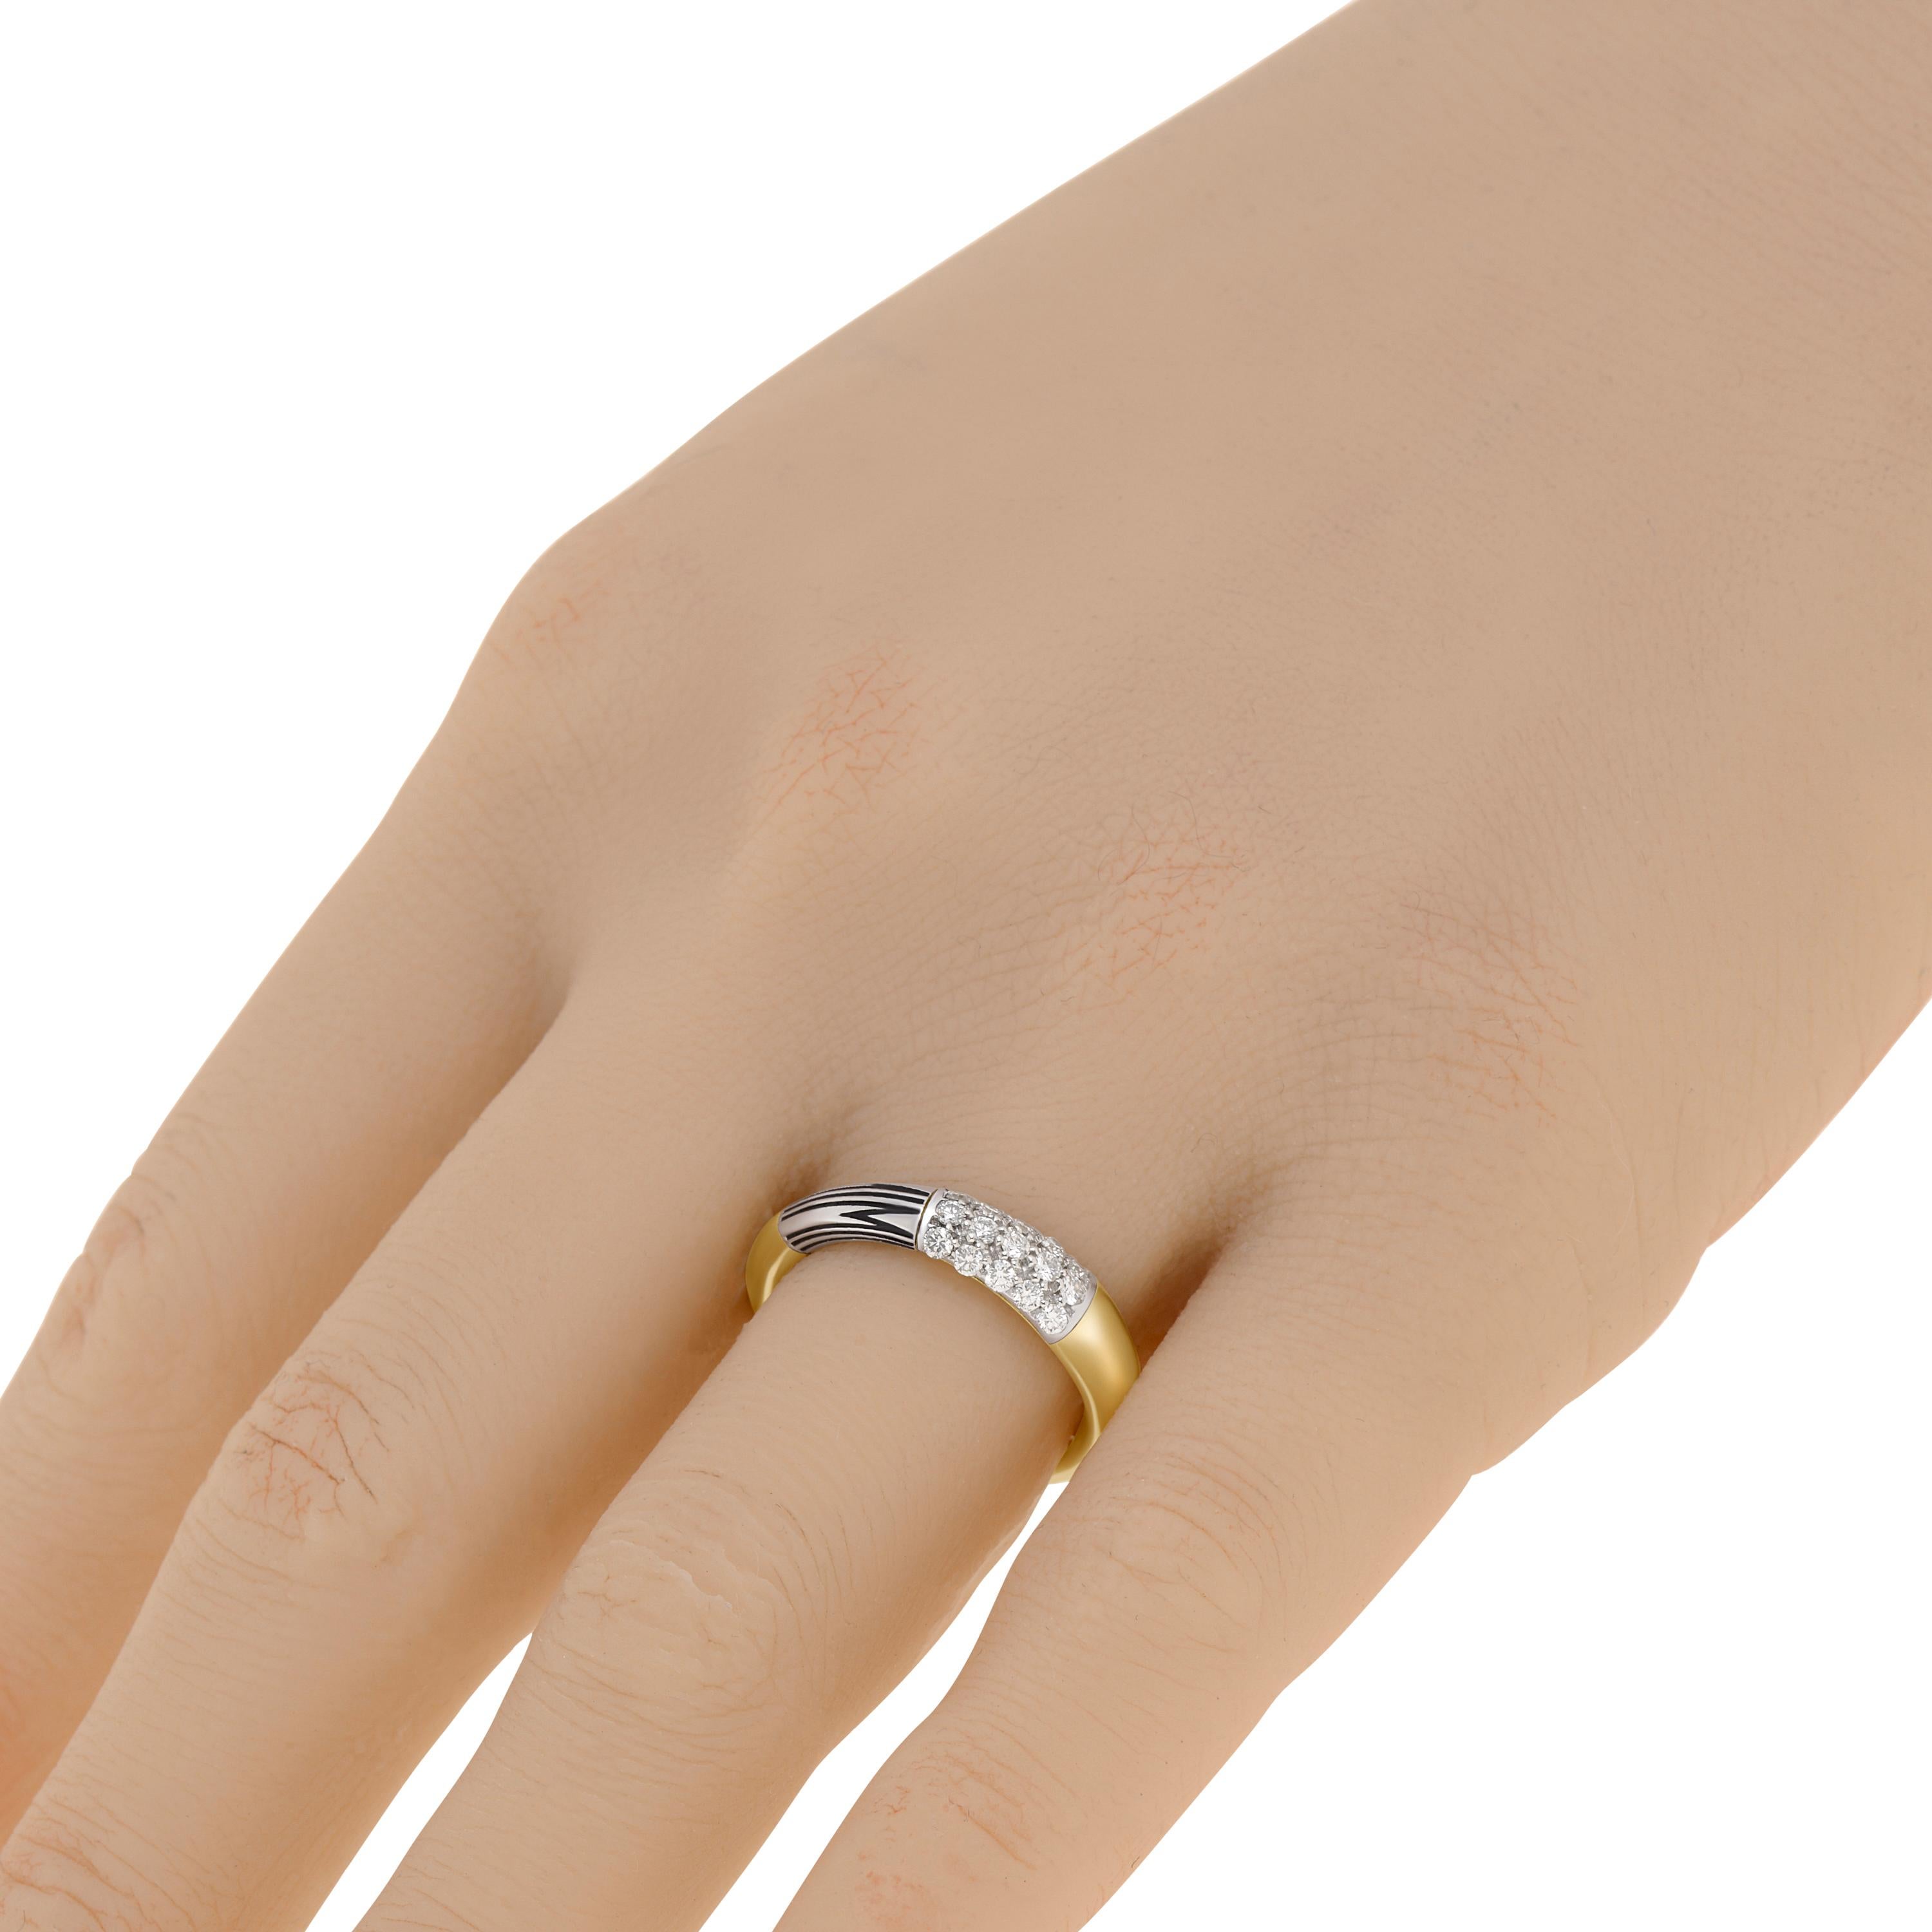 Mimi Milano 18K yellow gold and 18K white gold band ring features an elegant combination on 18K Yellow and white gold and 0.3ct. tw. diamond with letter 